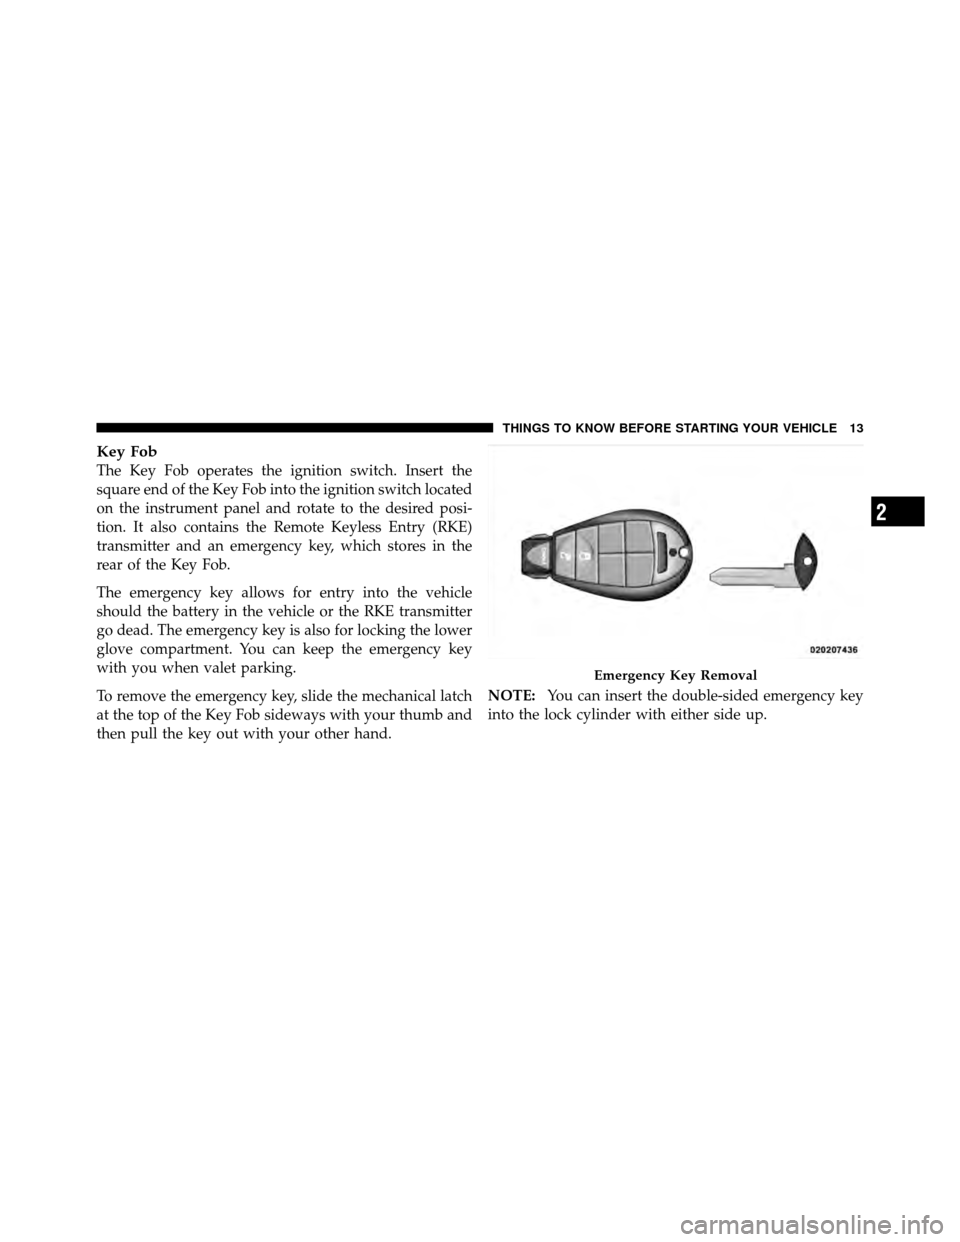 DODGE GRAND CARAVAN 2012 5.G User Guide Key Fob
The Key Fob operates the ignition switch. Insert the
square end of the Key Fob into the ignition switch located
on the instrument panel and rotate to the desired posi-
tion. It also contains t